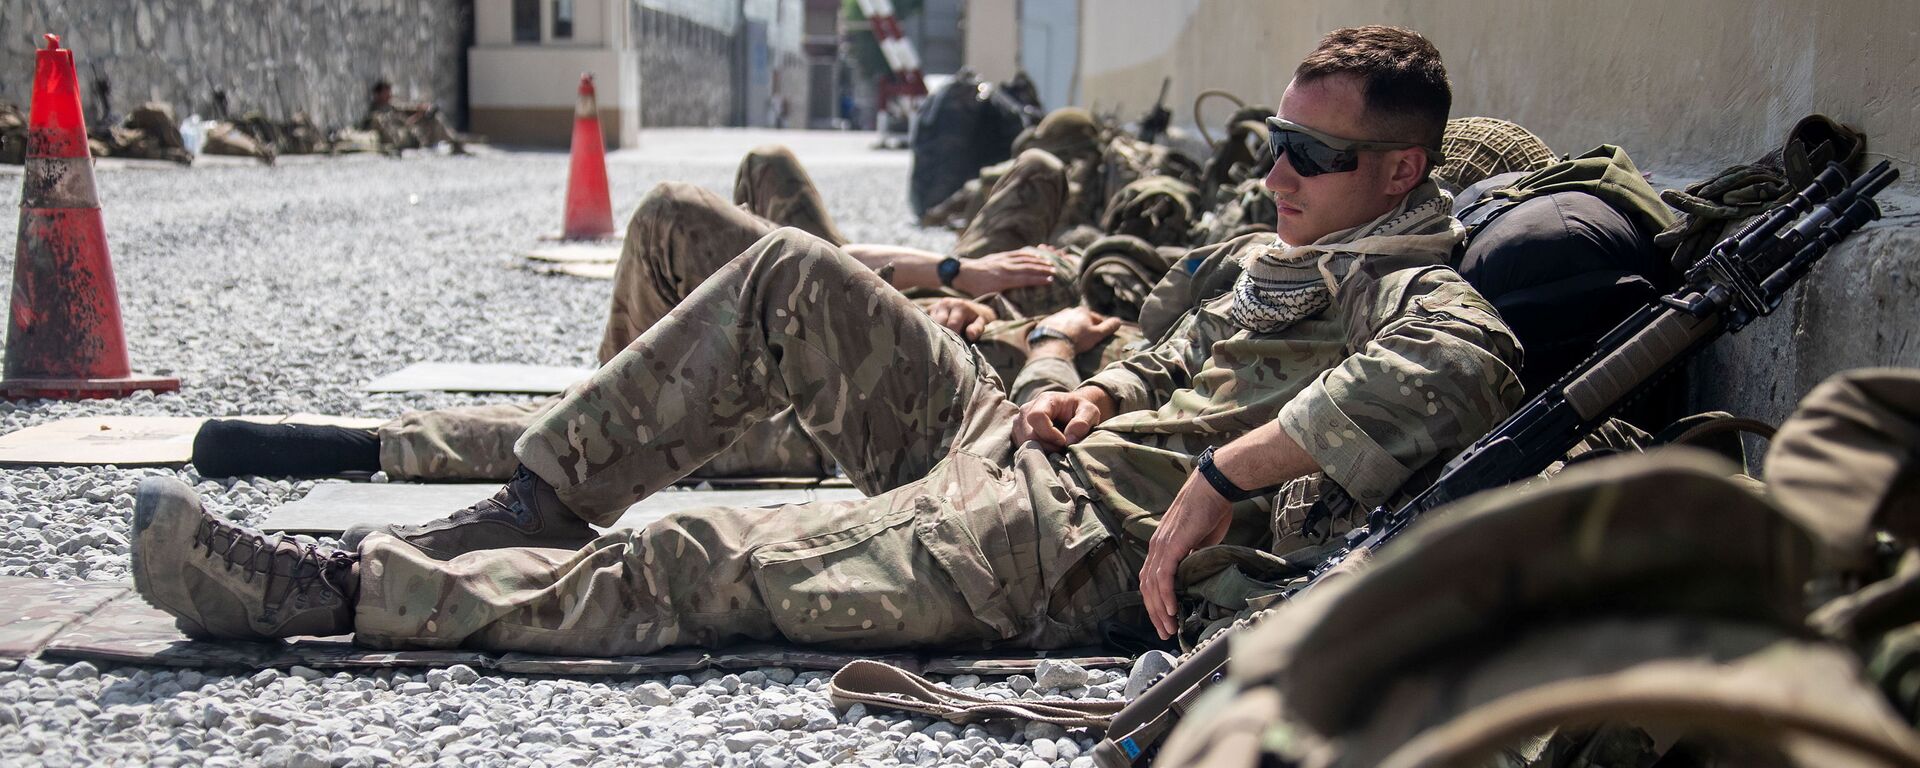 Members of the UK Armed Forces rest as they continue to take part in the evacuation of entitled personnel from Kabul airport, in Kabul, Afghanistan,19-22 August 2021, in this handout picture obtained by Reuters on 23 August 2021 - Sputnik International, 1920, 27.08.2021